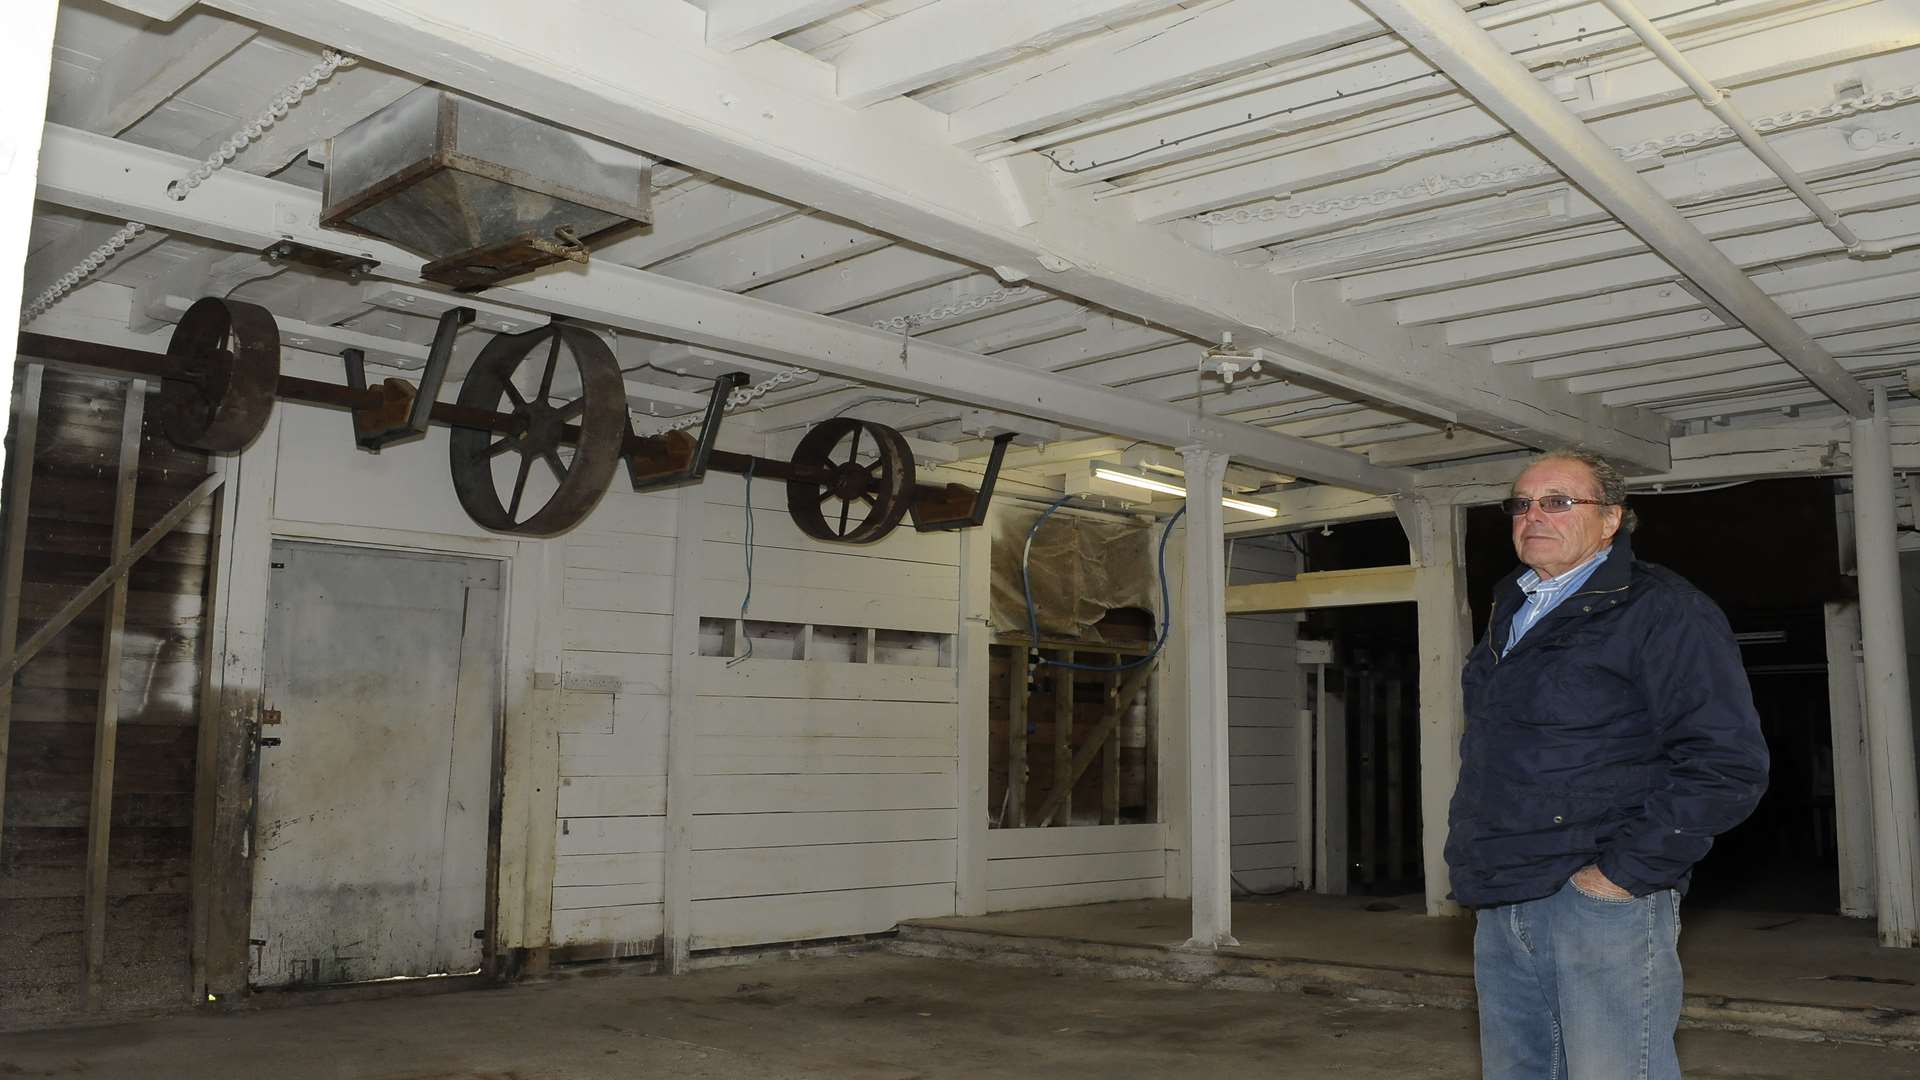 Quayside Properties owner Michael White inside the building.